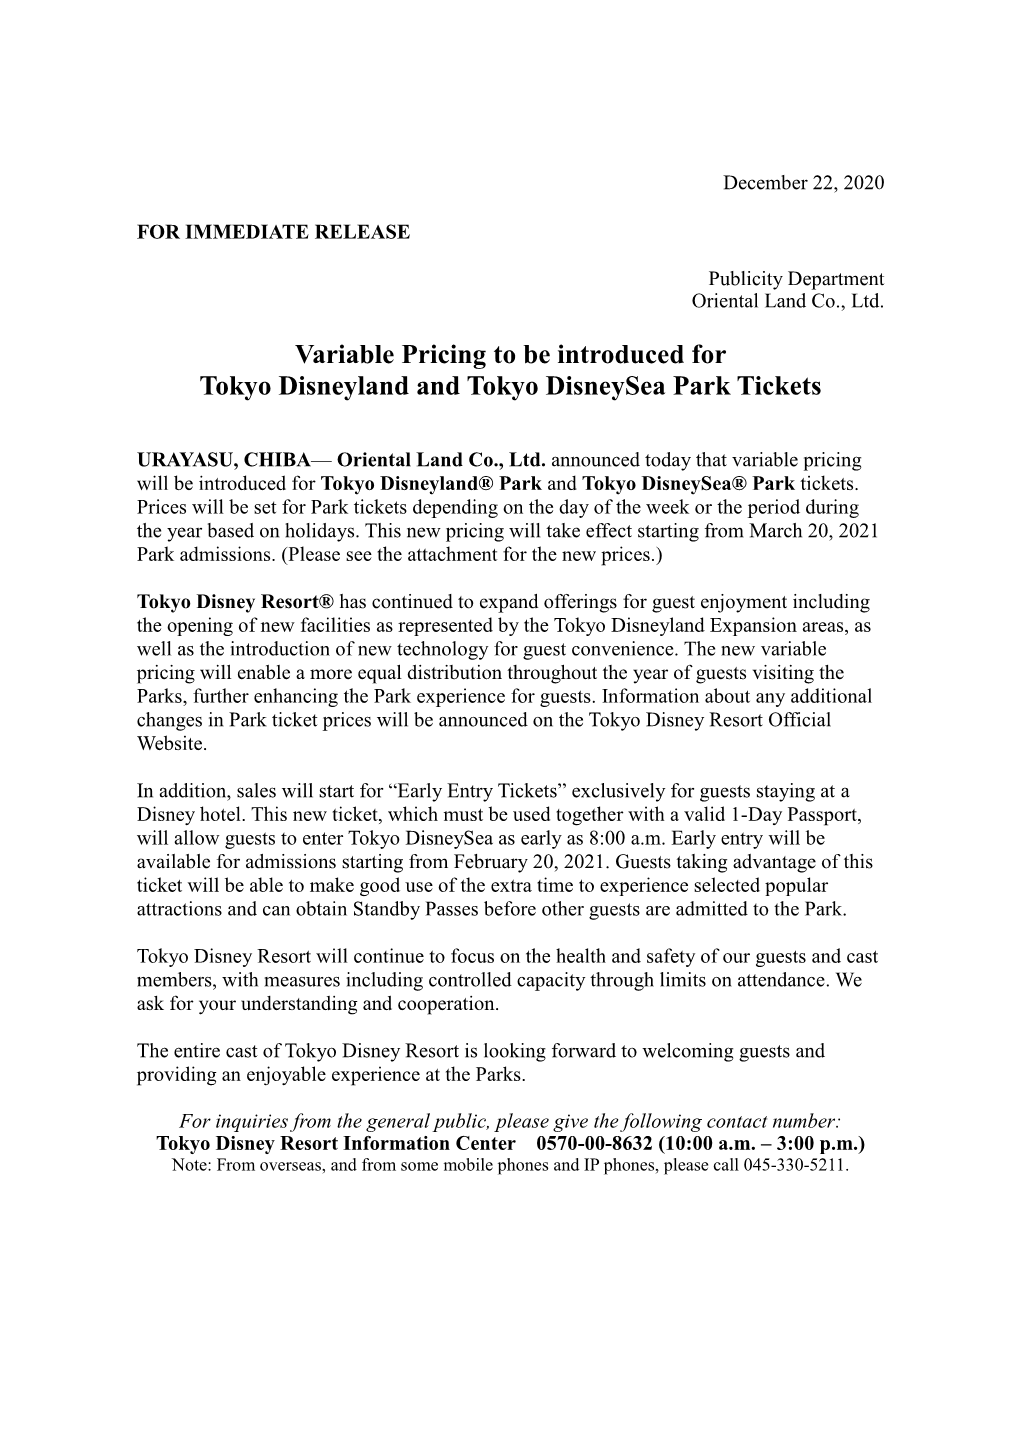 Variable Pricing to Be Introduced for Tokyo Disneyland and Tokyo Disneysea Park Tickets